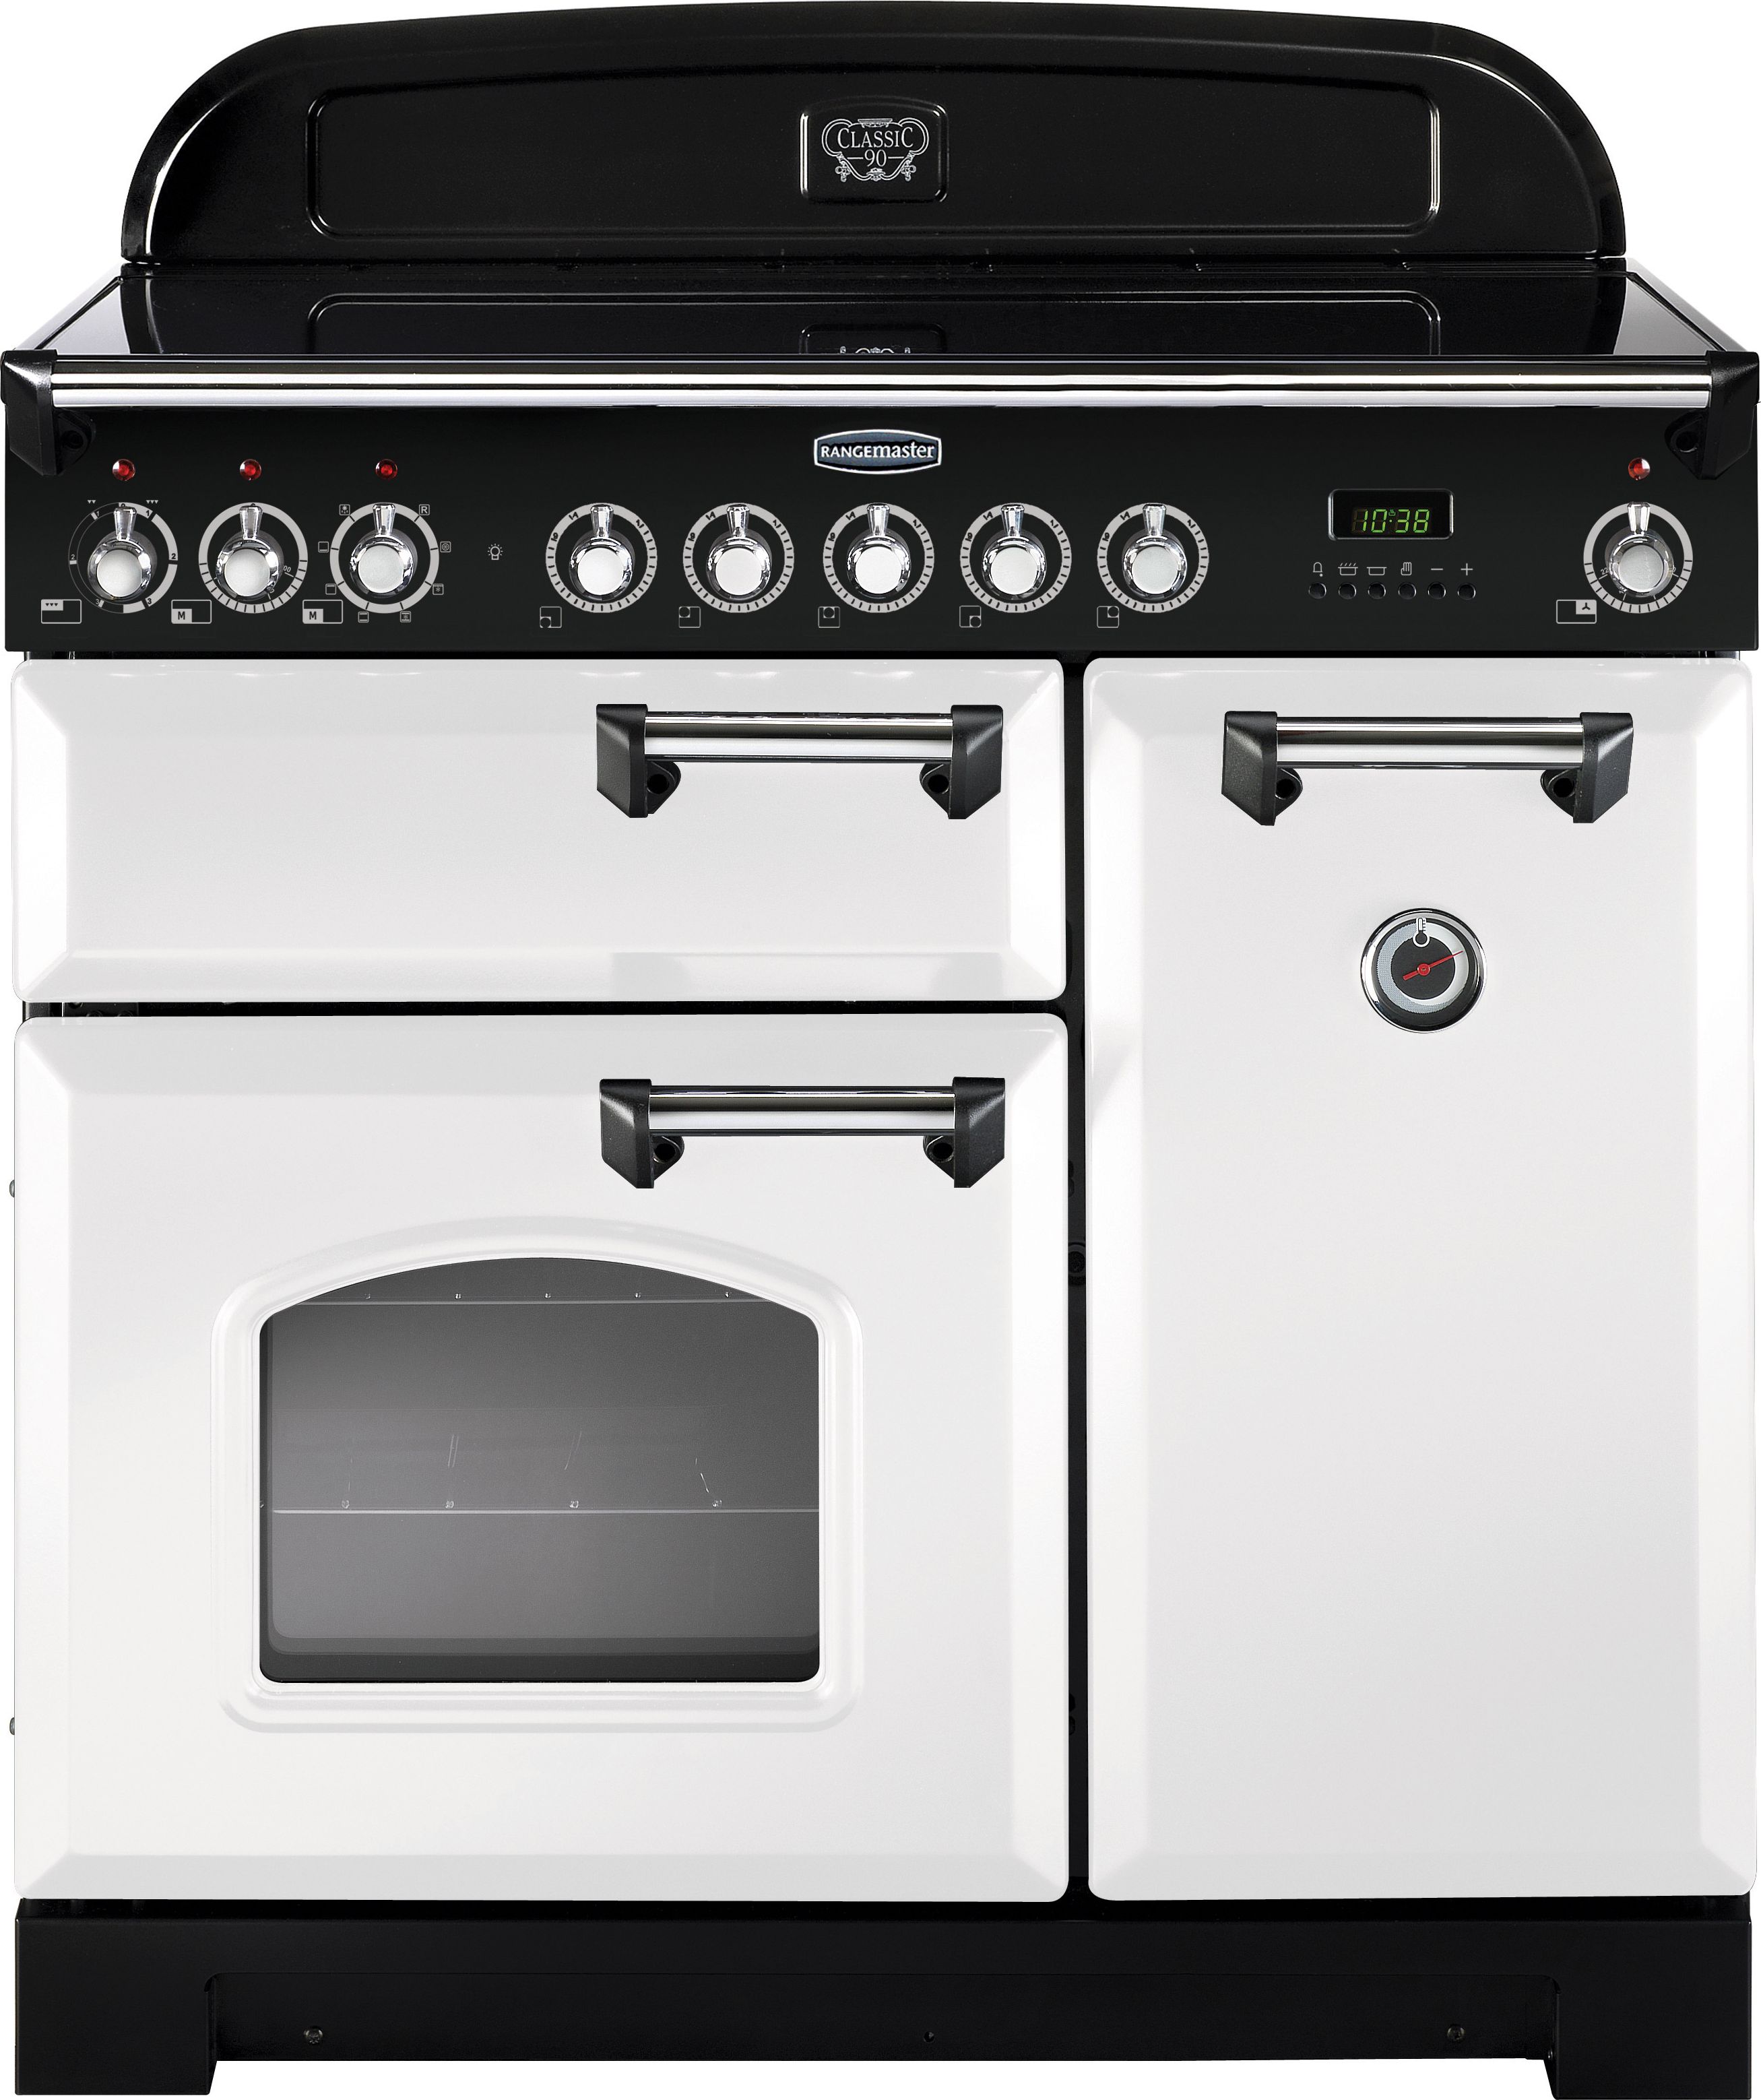 Rangemaster Classic Deluxe CDL90ECWH/C 90cm Electric Range Cooker with Ceramic Hob - White / Chrome - A/A Rated, White